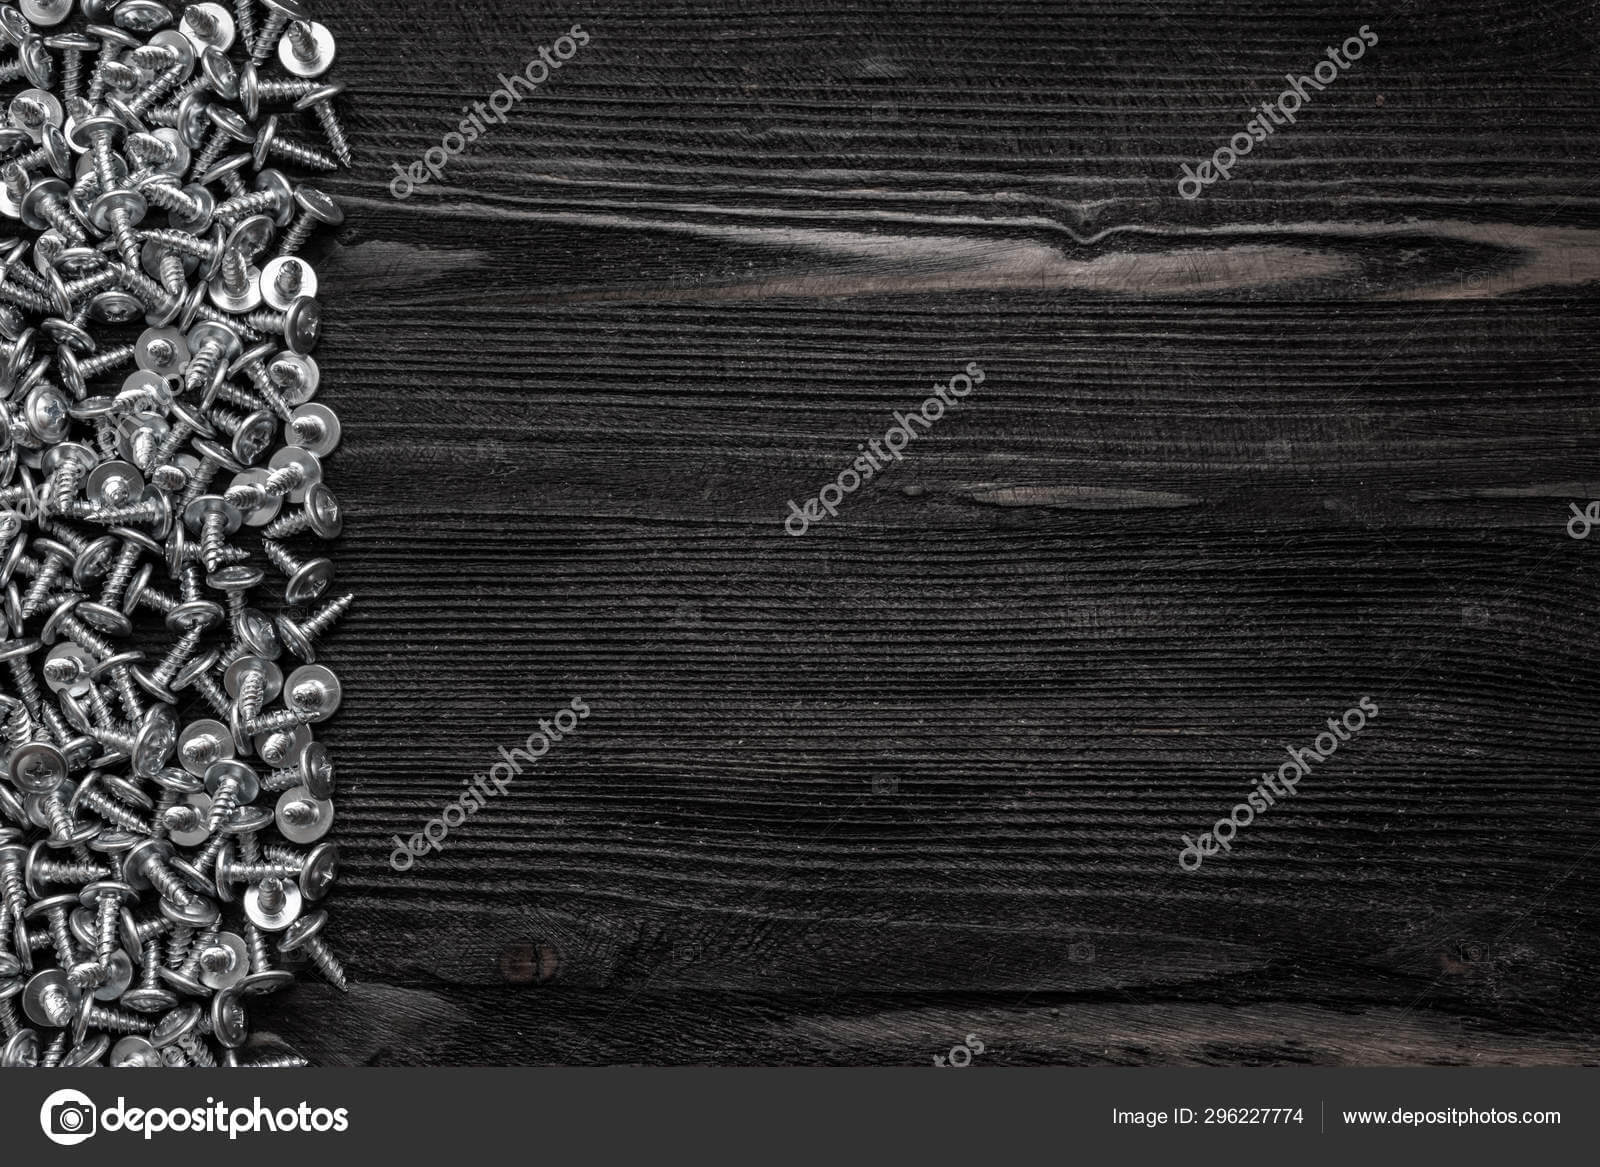 Some Wood Crews On Dark Wooden Desk Board Surface. Top View Pertaining To Borderless Certificate Templates